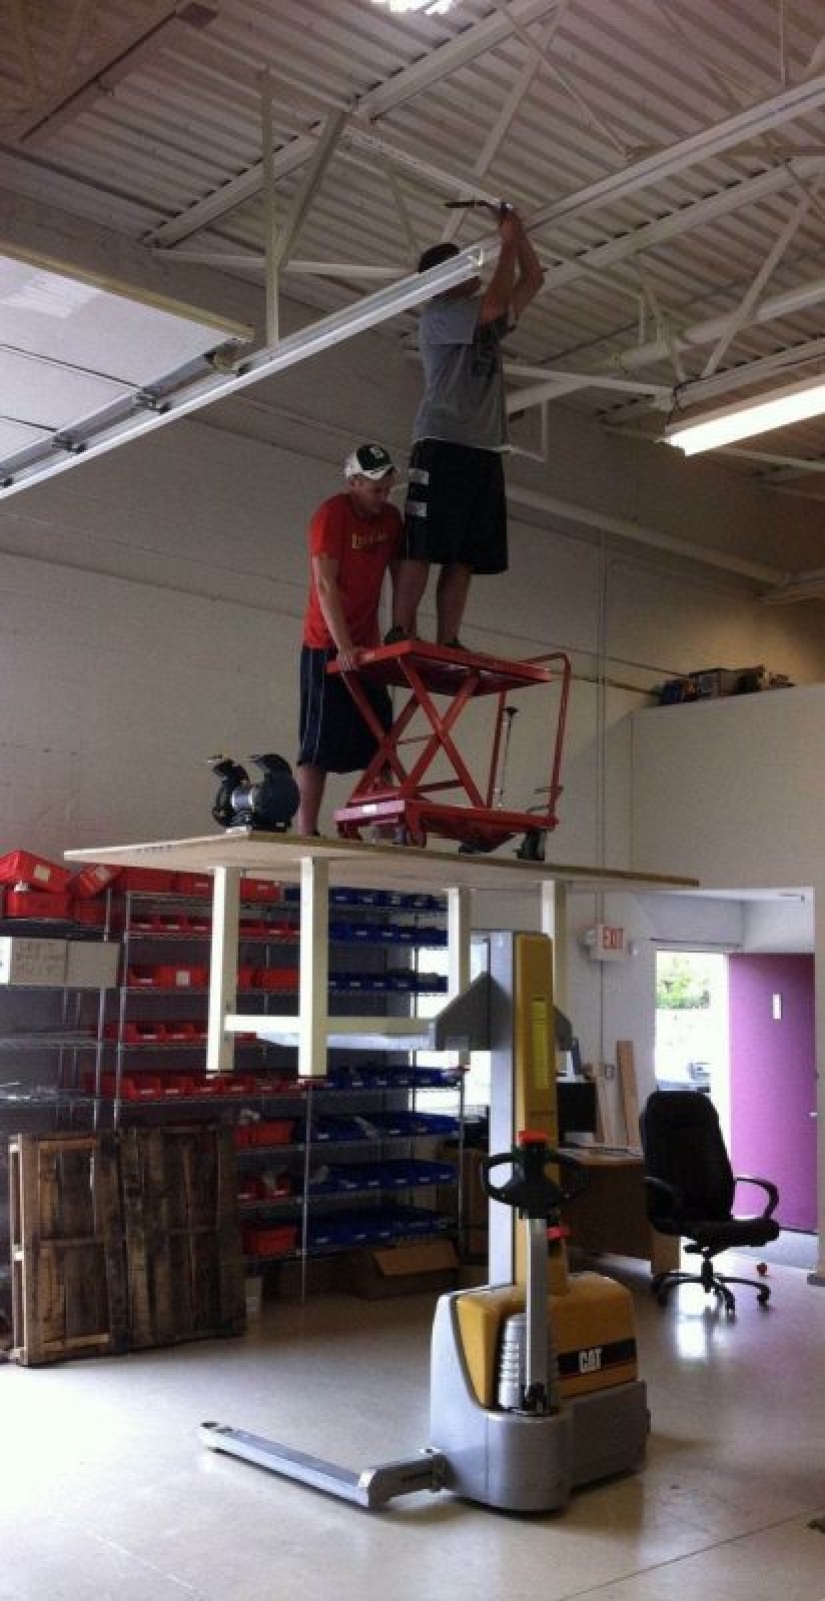 15 people who had never heard of safety precautions